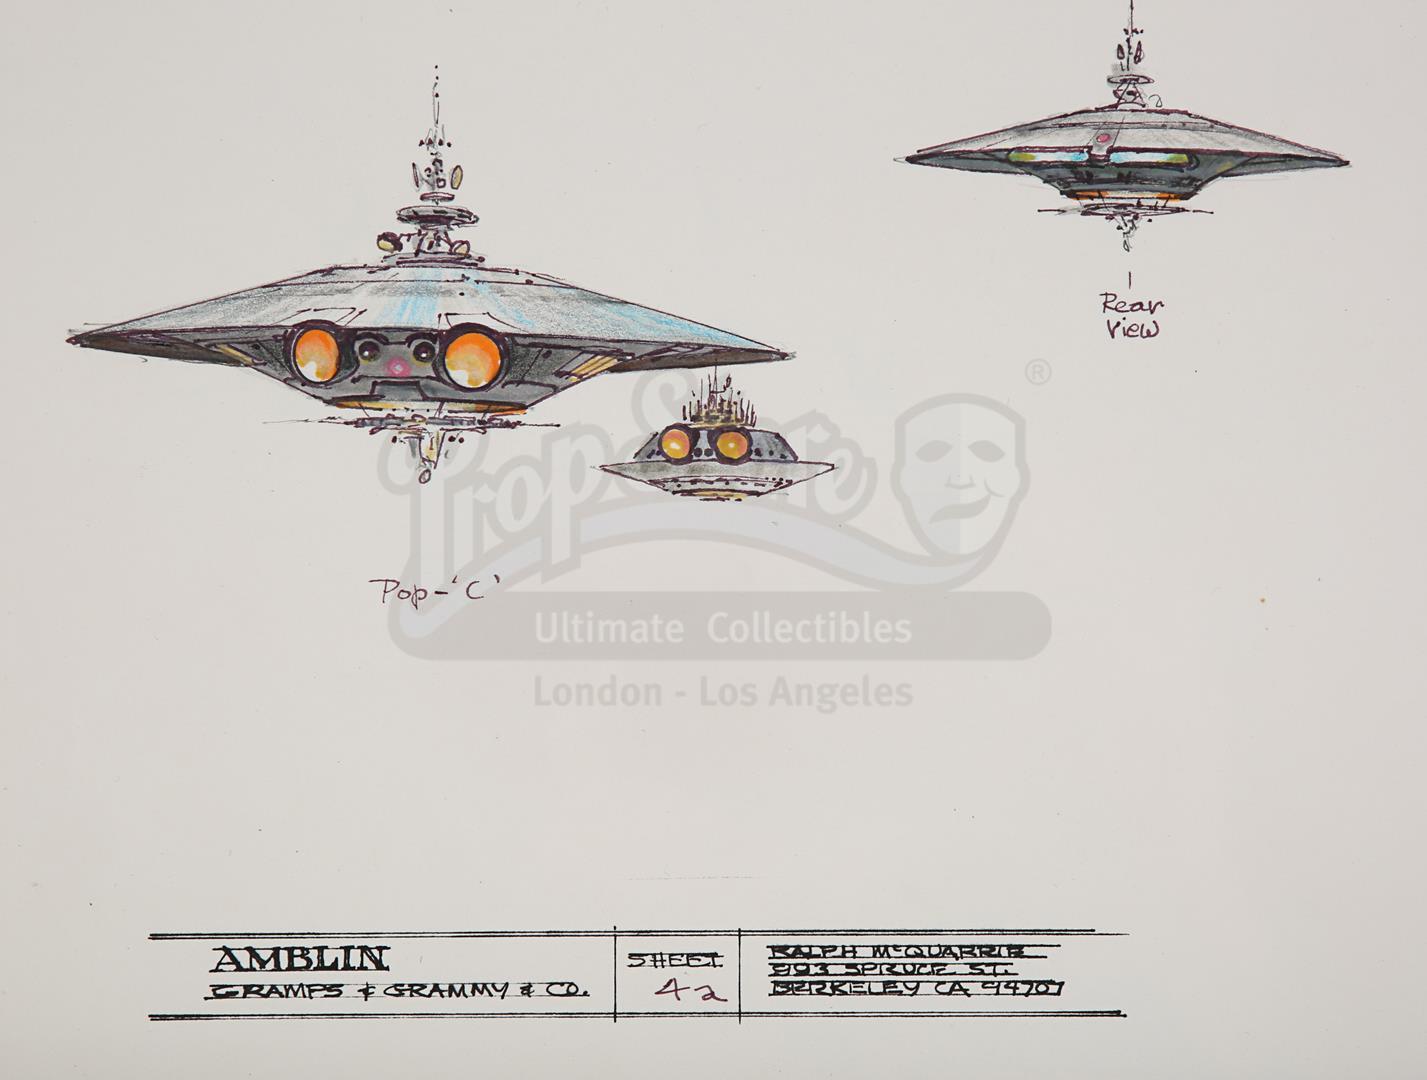 *BATTERIES NOT INCLUDED (1987) - Pair of Hand-drawn Ralph McQuarrie "Pop" Spaceship Illustration She - Image 6 of 6